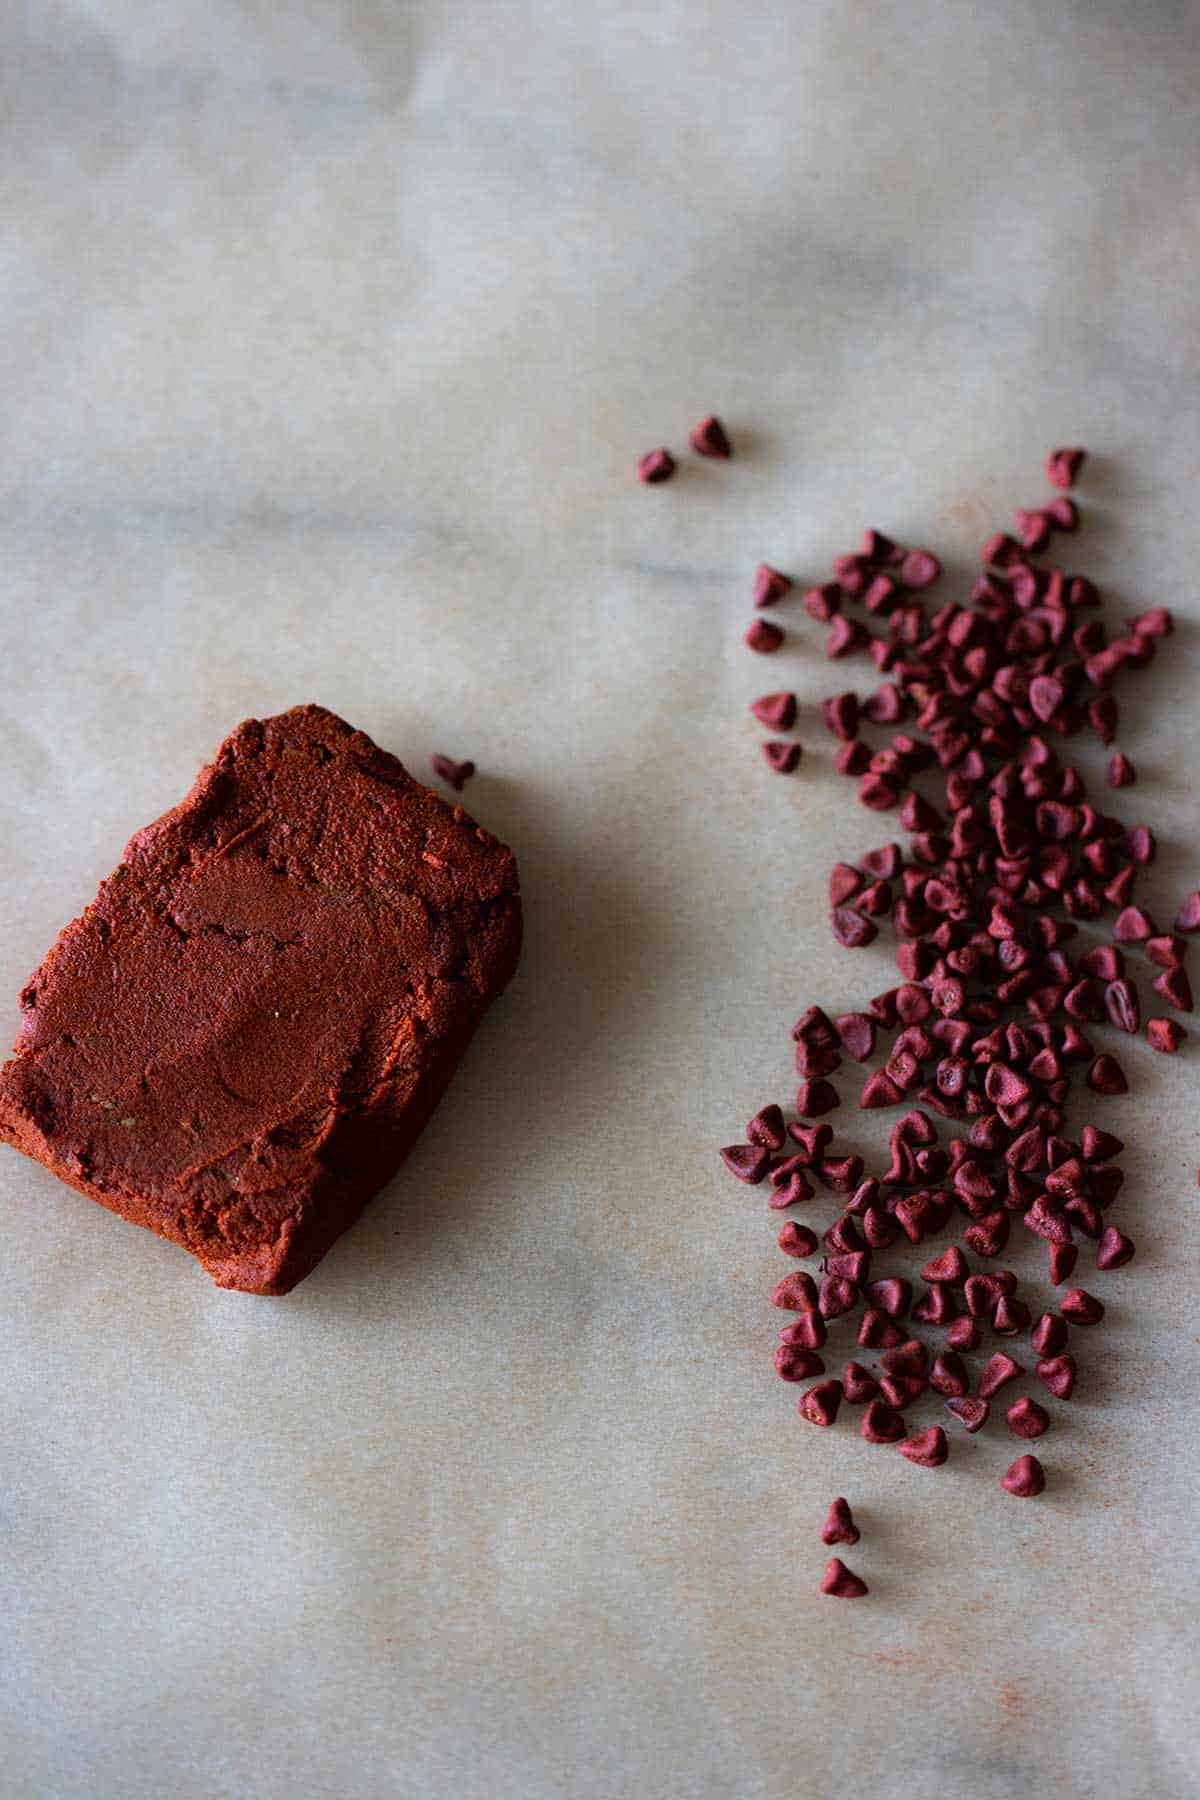 achiote paste and achiote seeds.